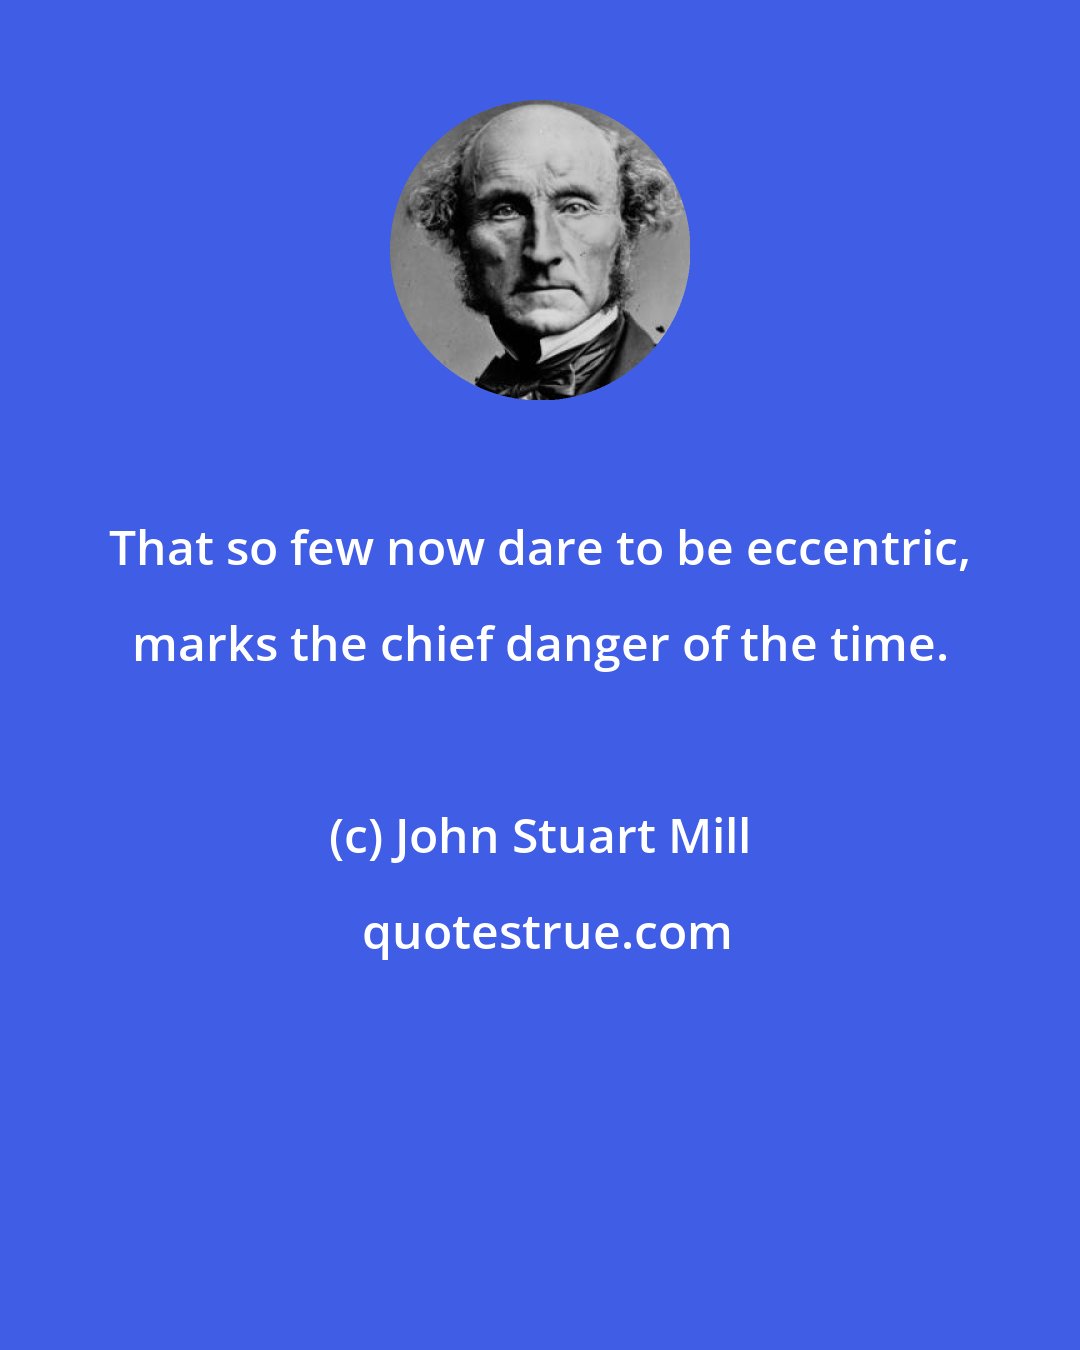 John Stuart Mill: That so few now dare to be eccentric, marks the chief danger of the time.